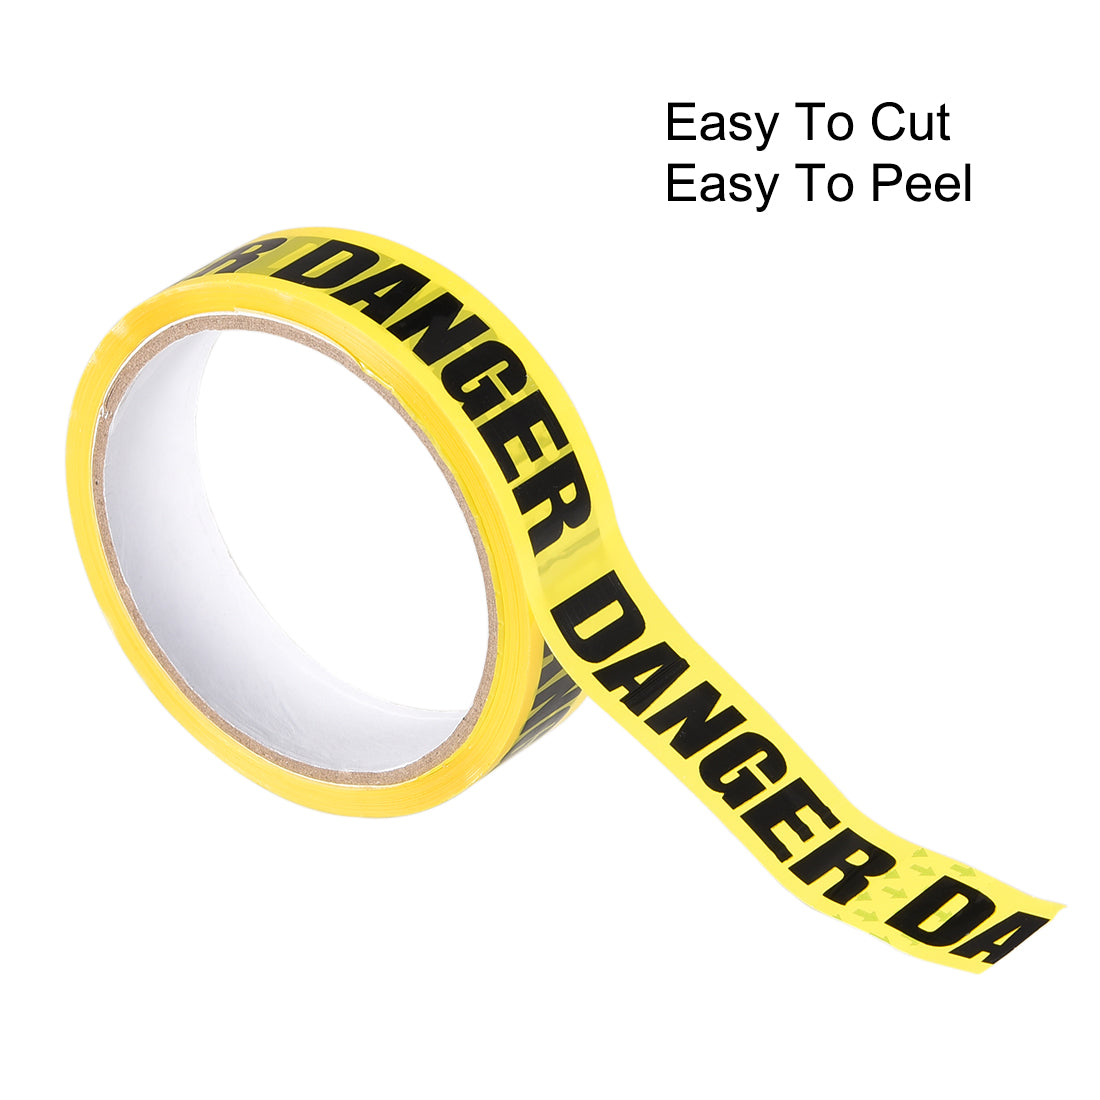 uxcell Uxcell Caution Warning Stripe Sticker Adhesive Tape DANGER Marking, 82 Ft x 1 Inch(LxW), Yellow Black for Workplace Wet Floor Caution